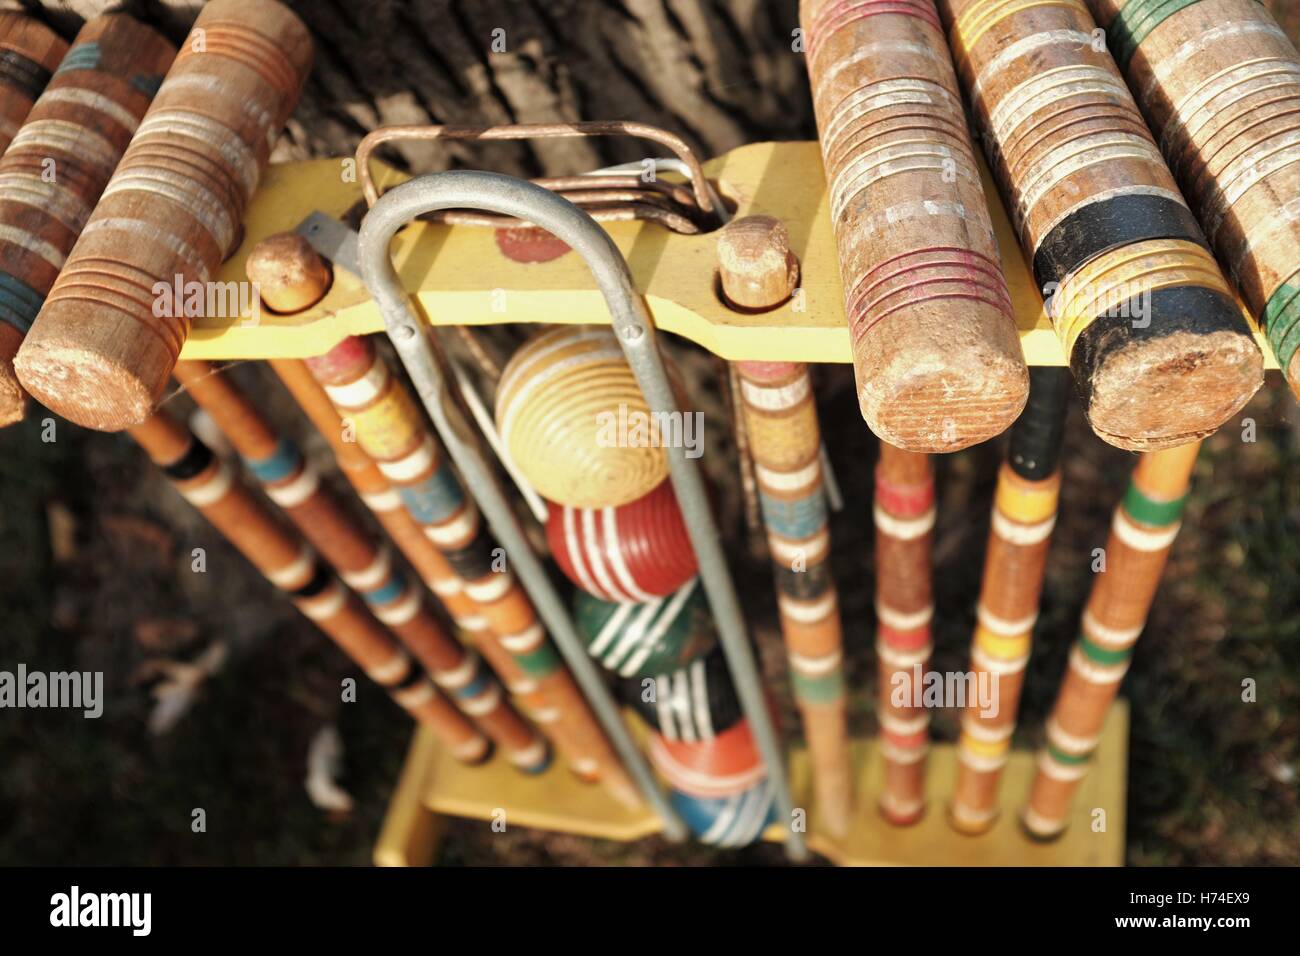 Old croquet set used in outdoor gatherings as a socially competitive recreational activity. Stock Photo